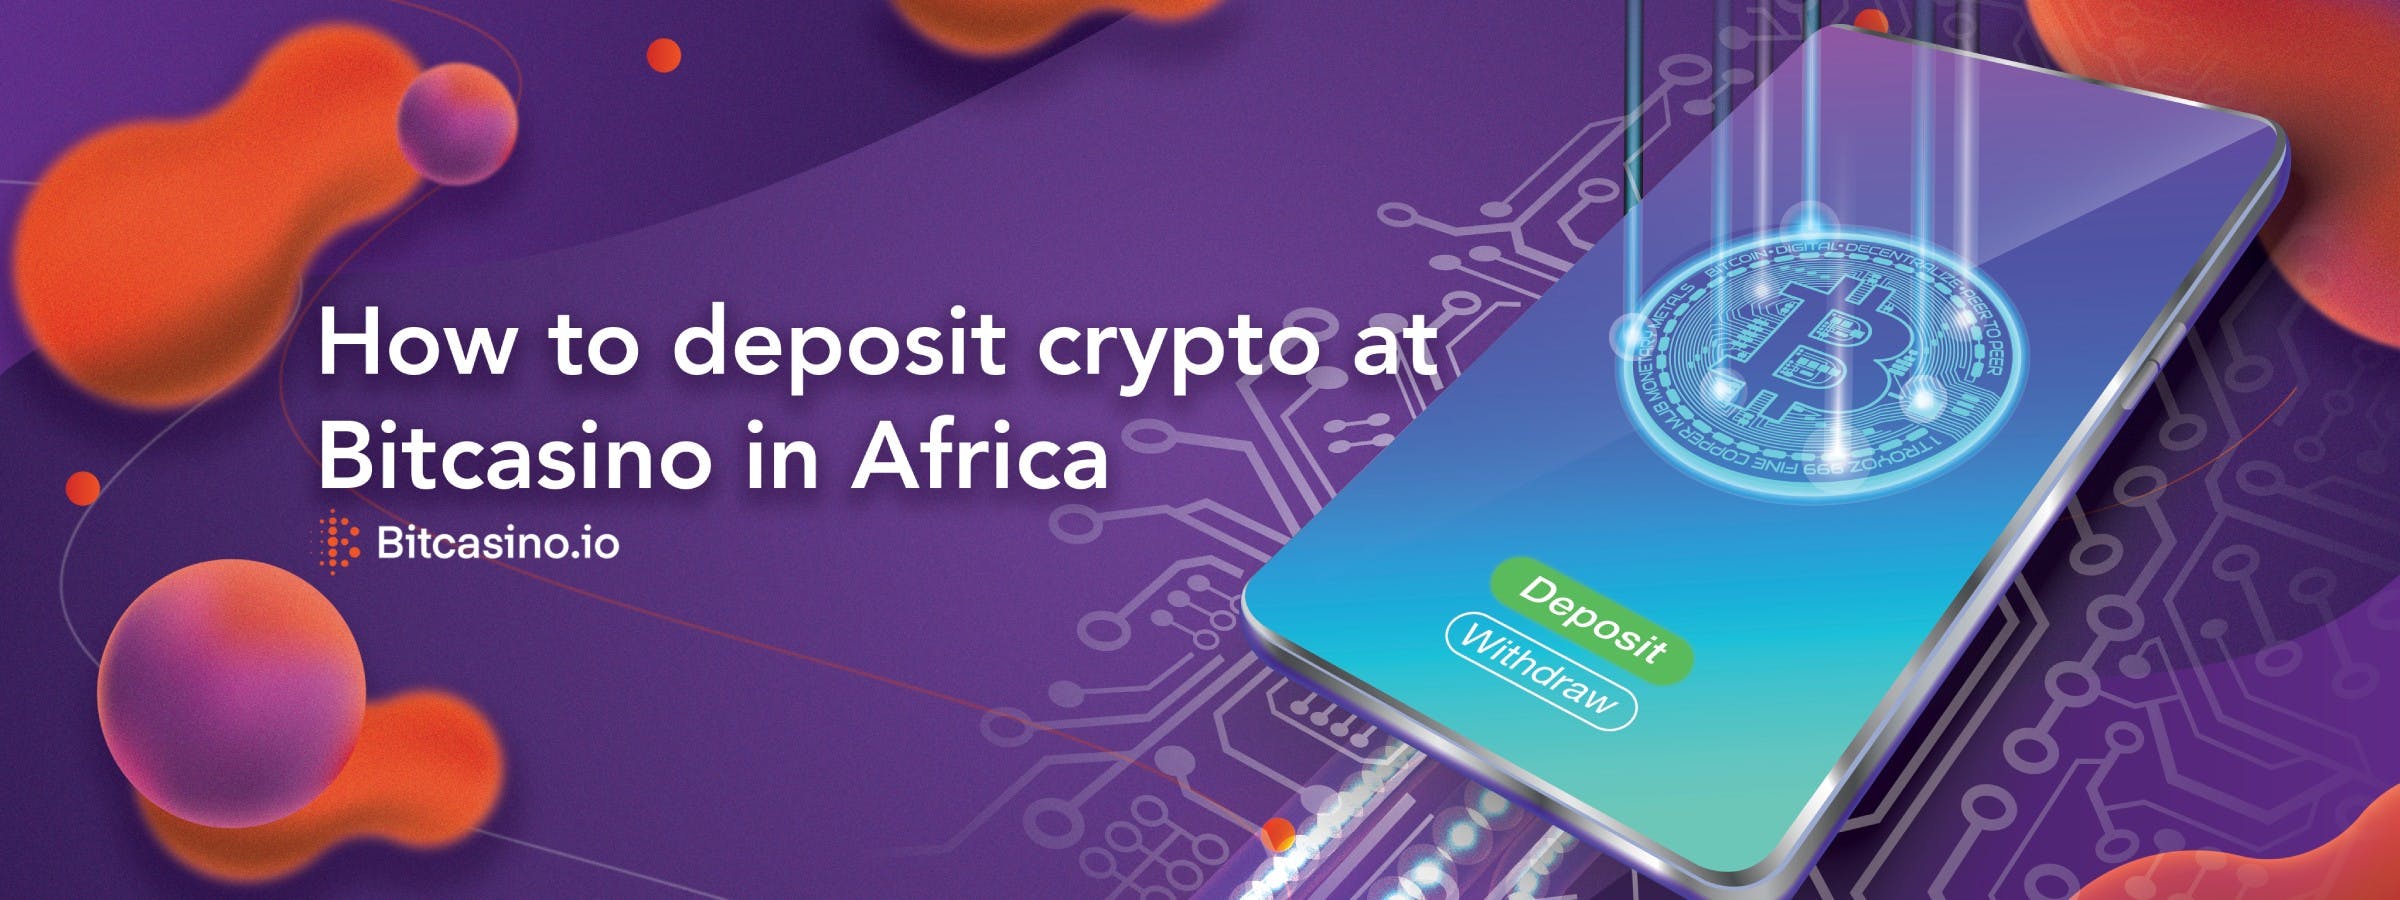 How to deposit crypto at Bitcasino in Africa